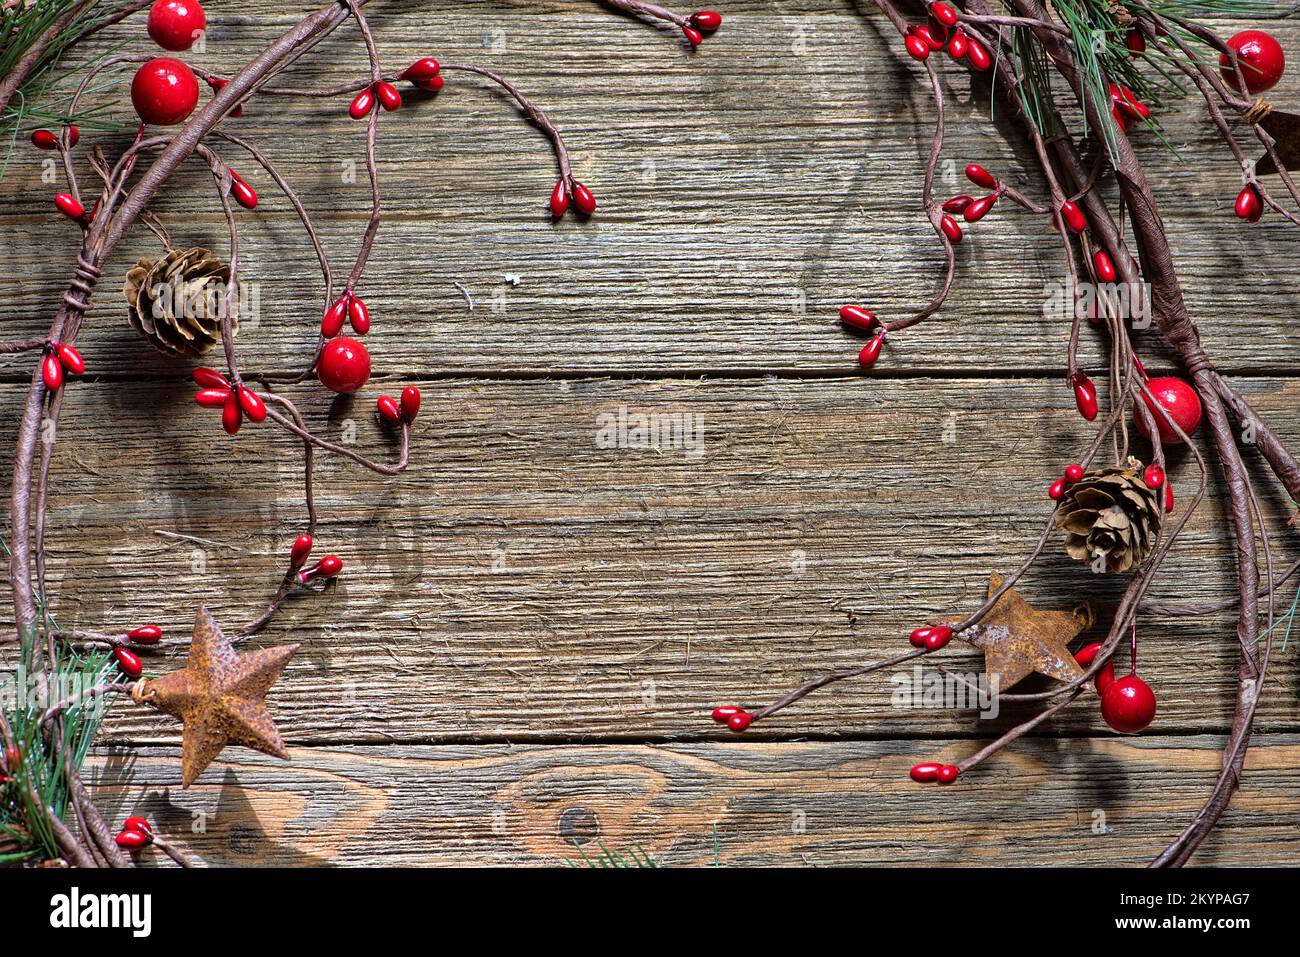 Grape vine traditional Christmas decorations, farmhouse style, on a wooden background, no text Stock Photo